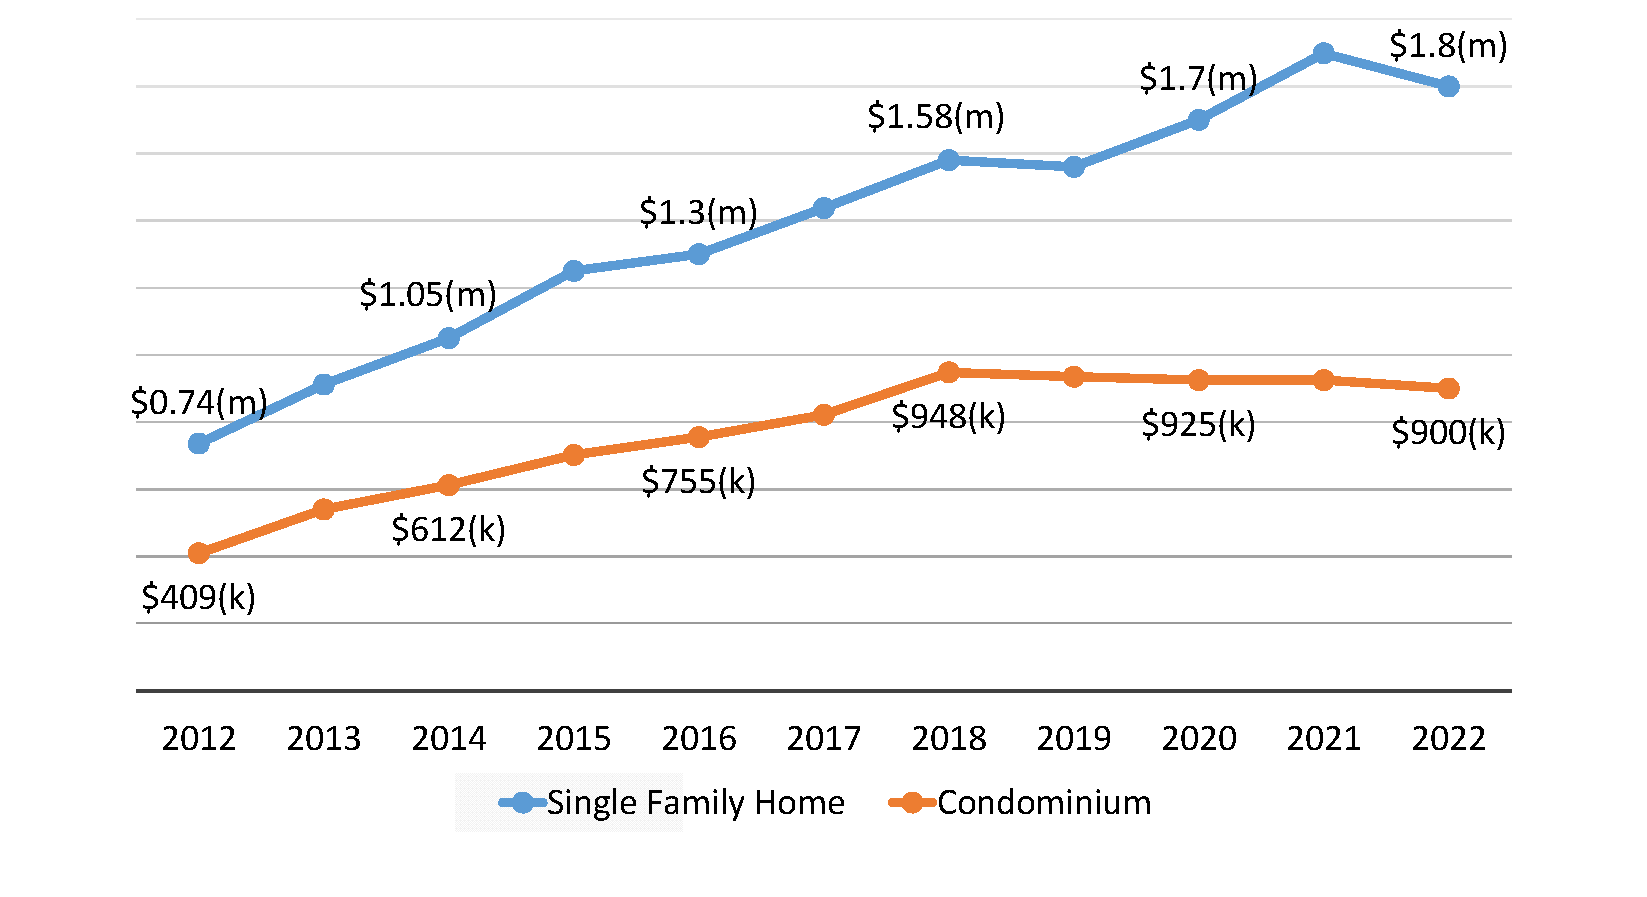 median home price in San Mateo County 2011-2022